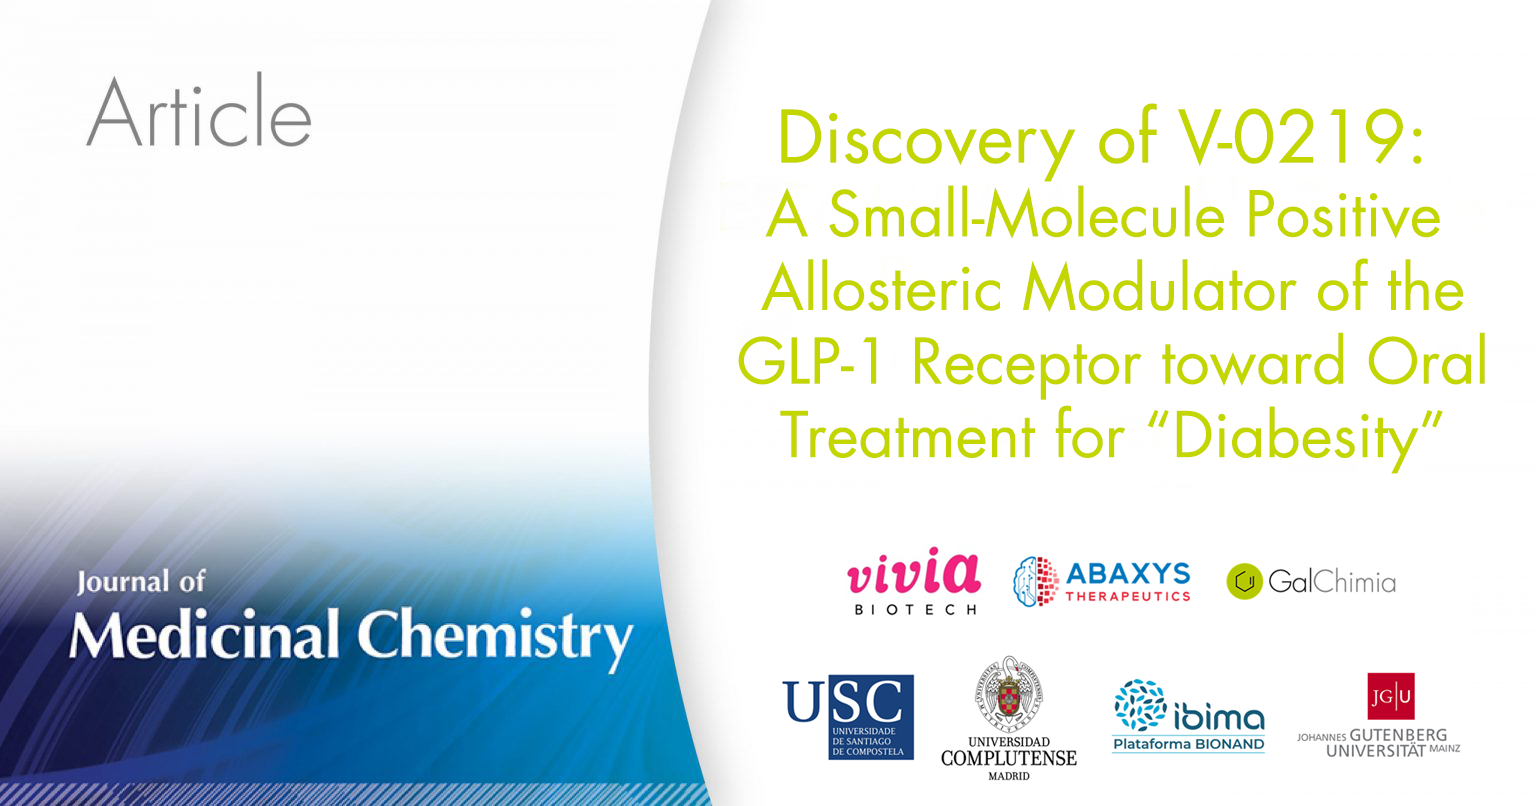 JMC article by GalChimia on a psoitive allosteric modulator of GLP-1R